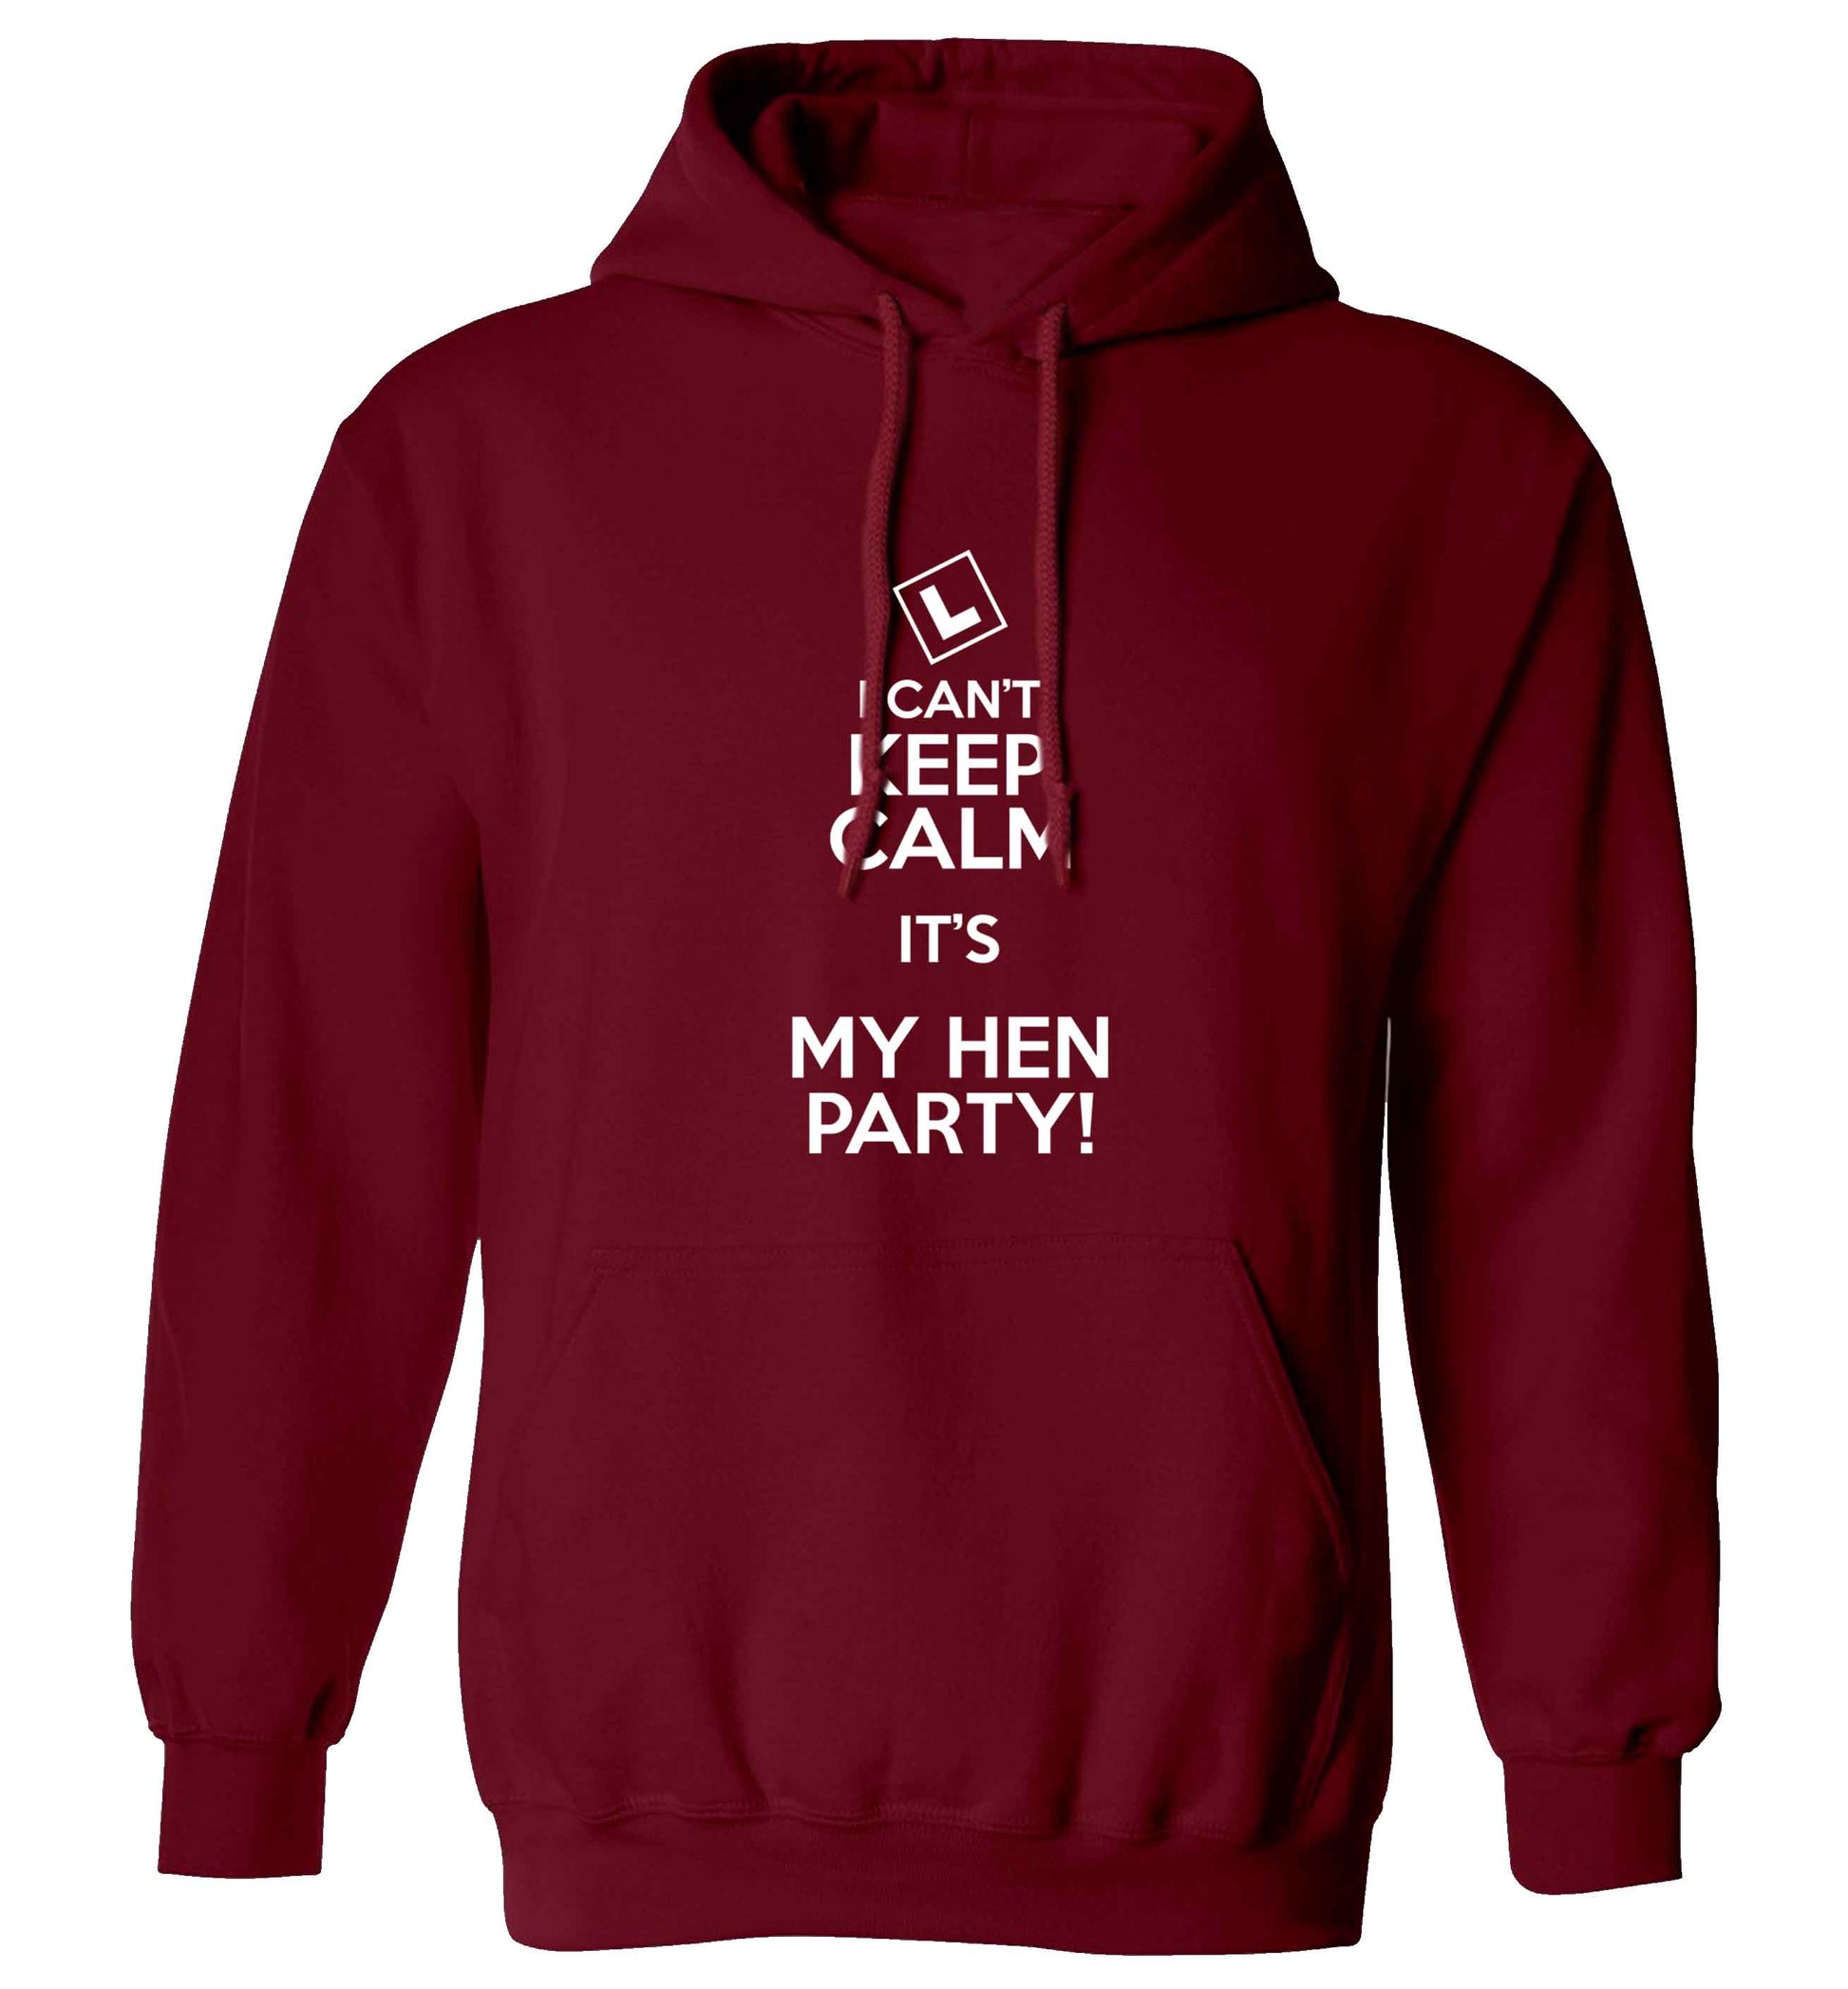 I can't keep calm it's my hen party adults unisex maroon hoodie 2XL